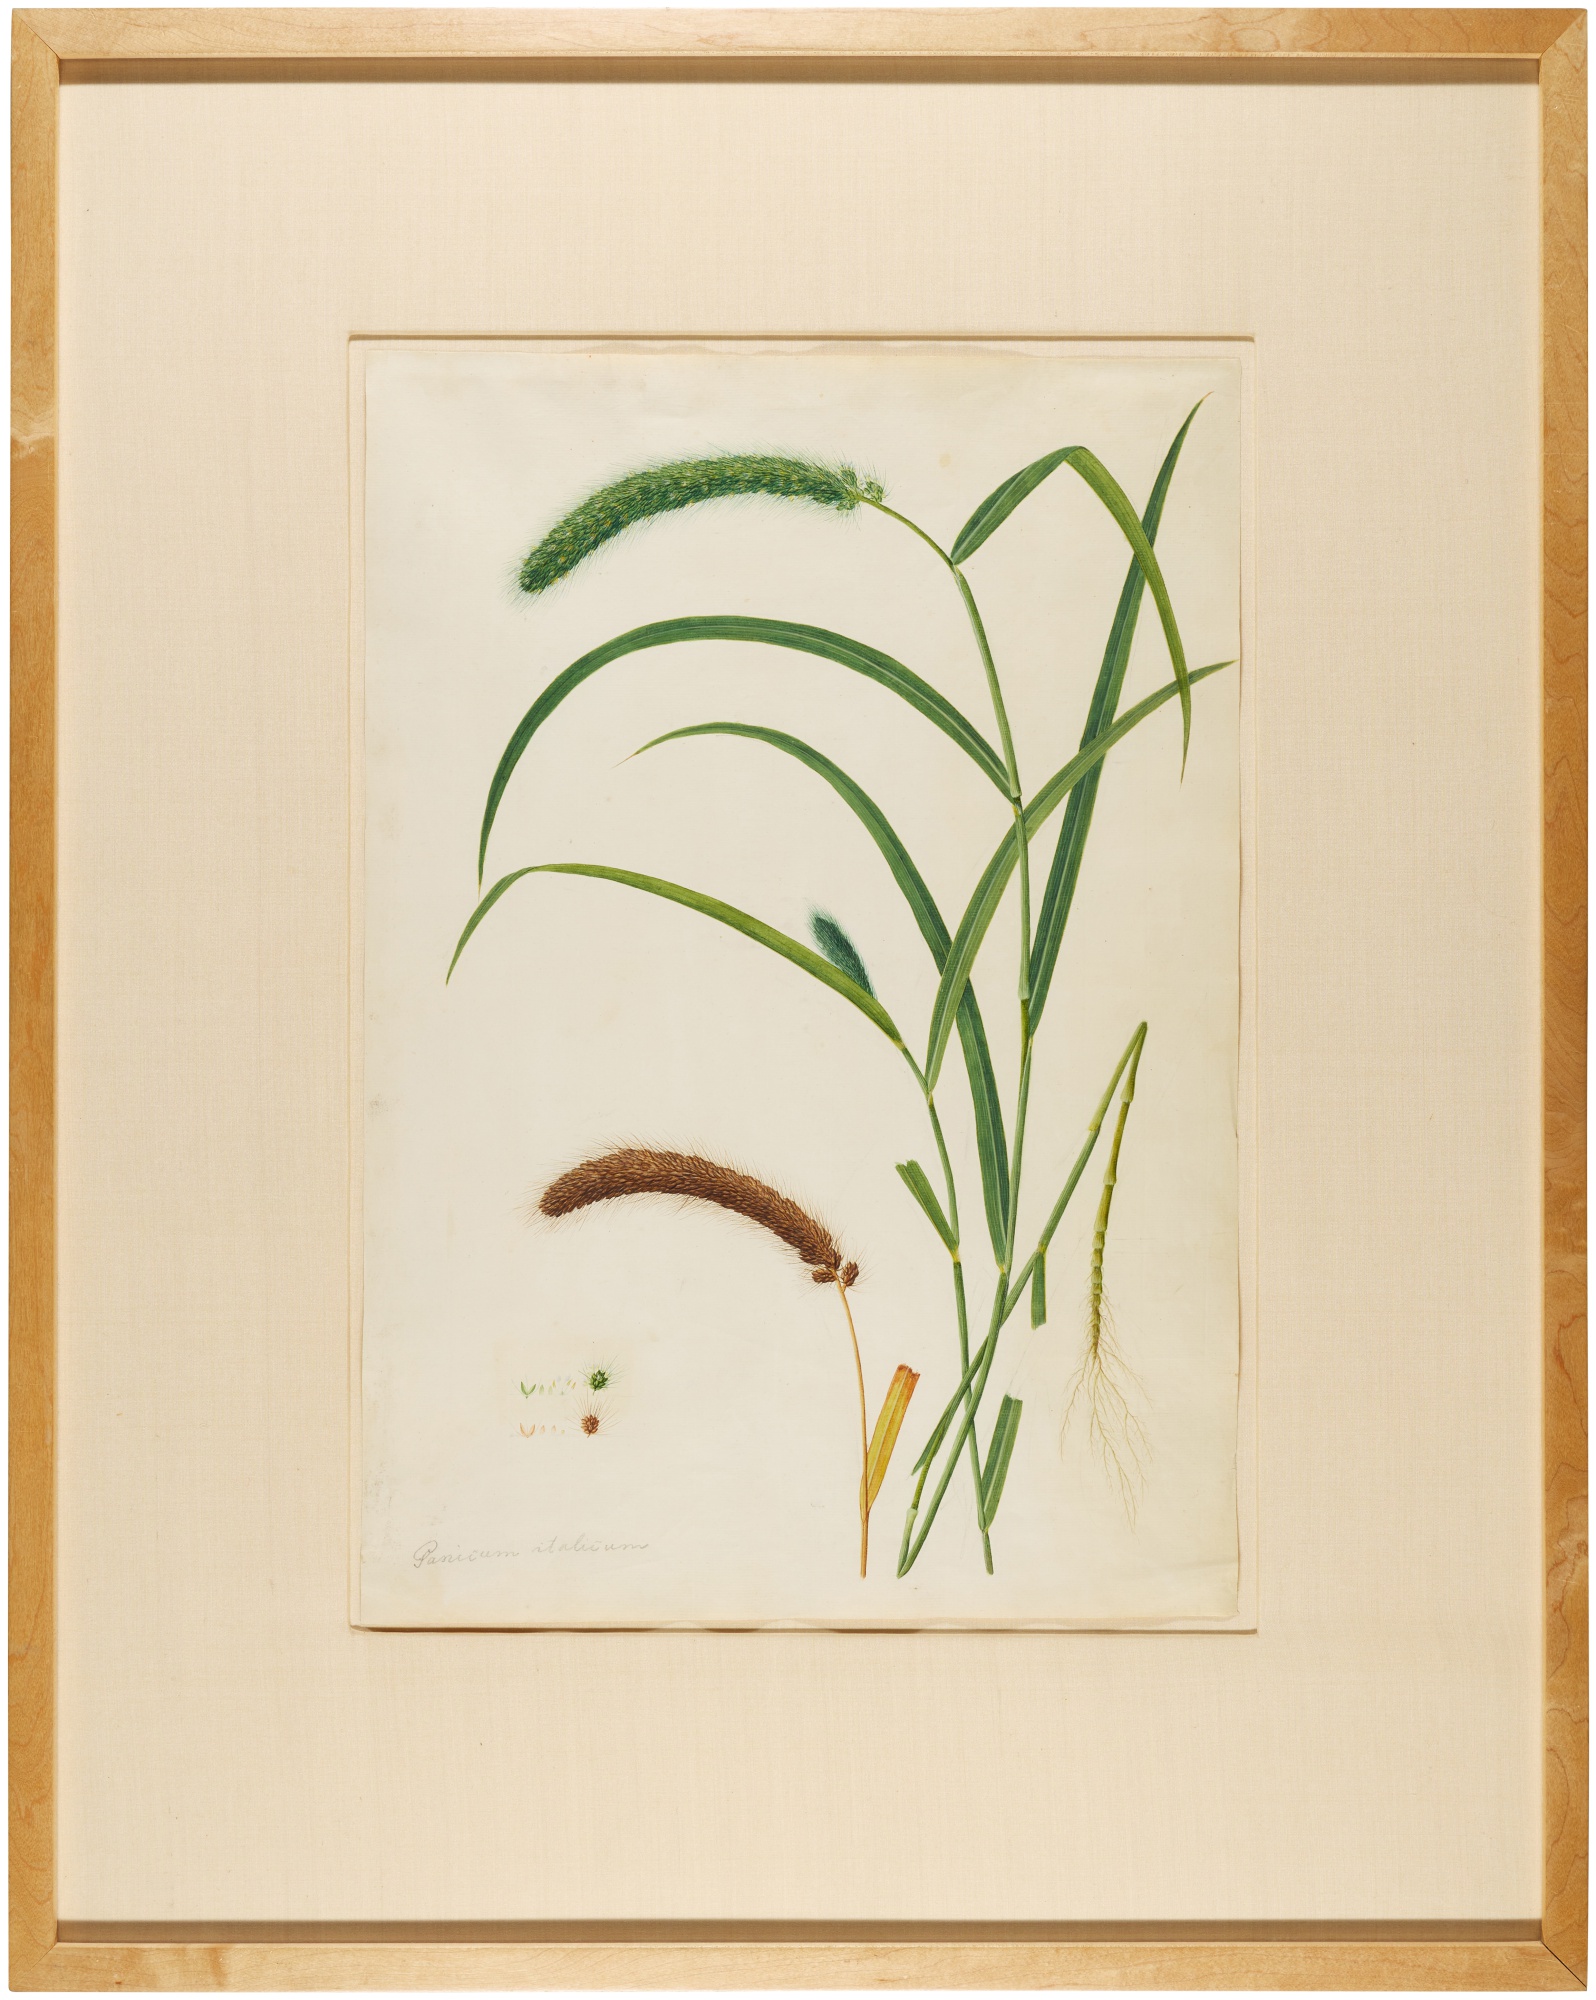 A study of Foxtail Millet (Panicum Italicum), India, Company School, early 19th Century - Image 2 of 2